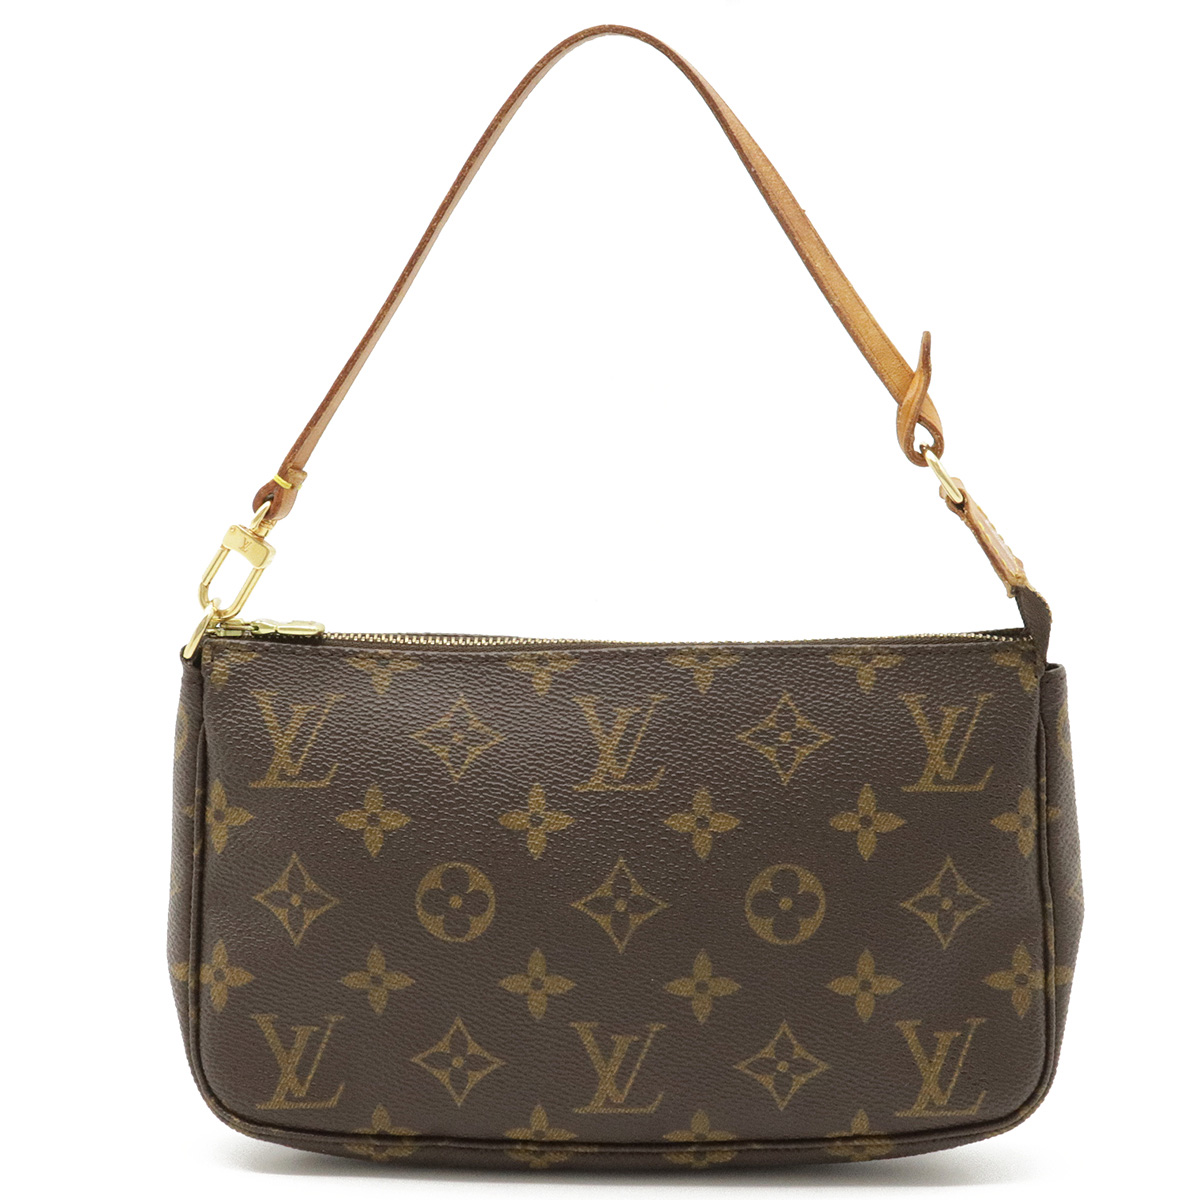 SALE／63%OFF】 LOUIS VUITTON ルイ ヴィトン モノグラム ポシェット 